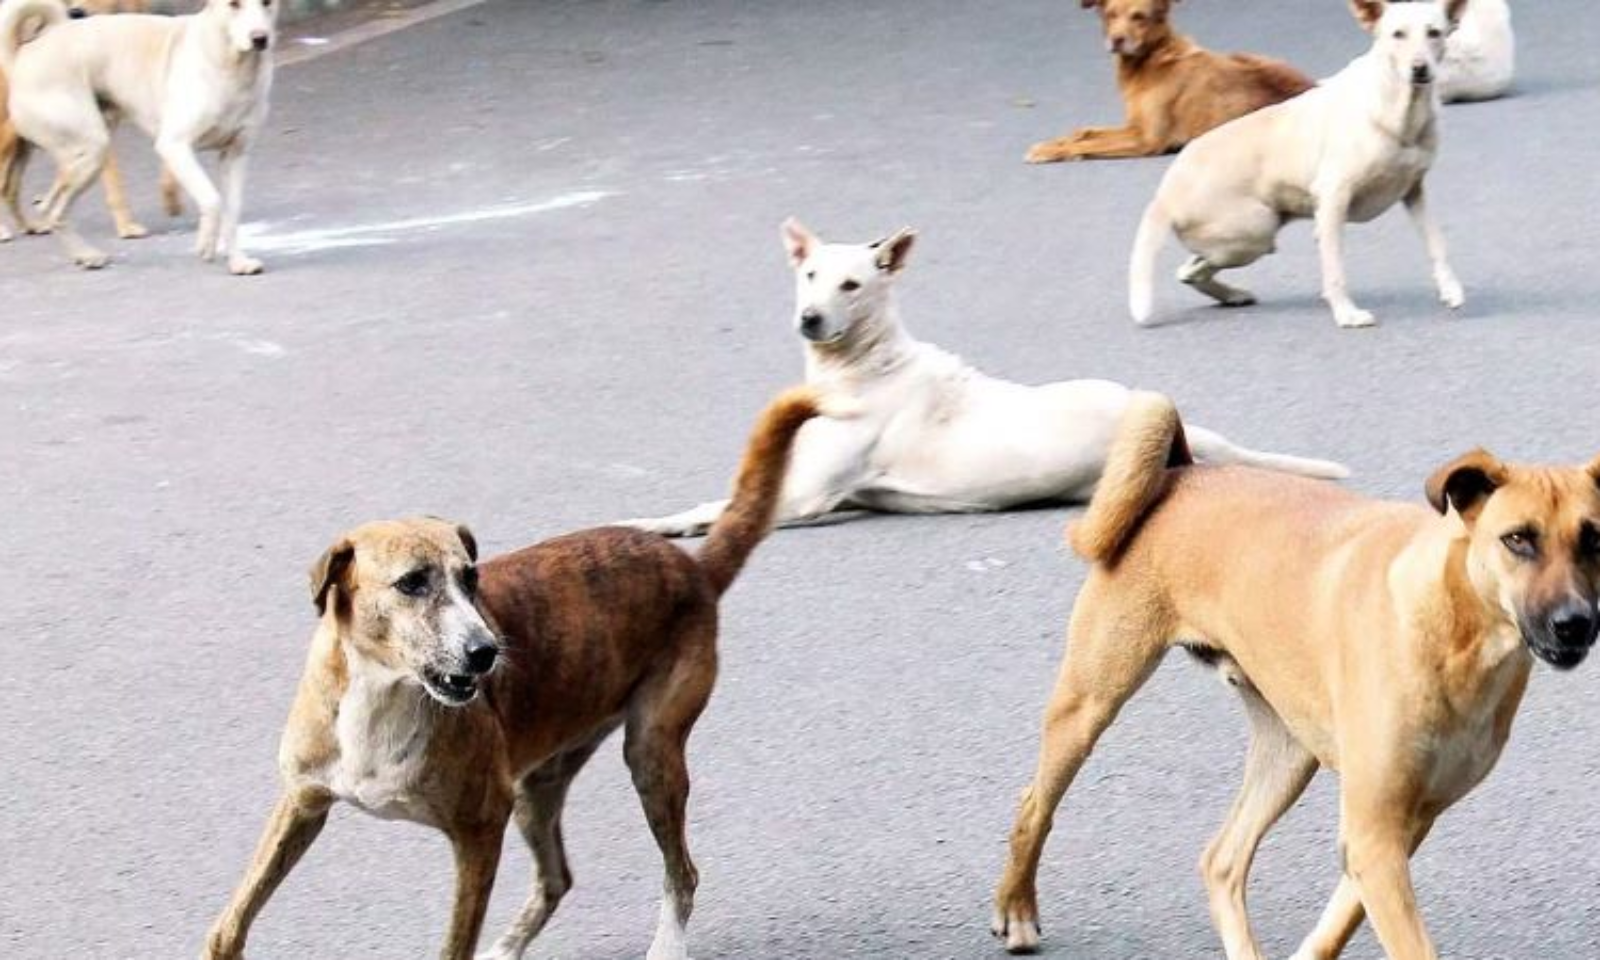 Kerala Stray Dog Issue : Animal Rights Group Approaches Supreme Court  Opposing Culling Of Dogs, Gives Alternate Proposals